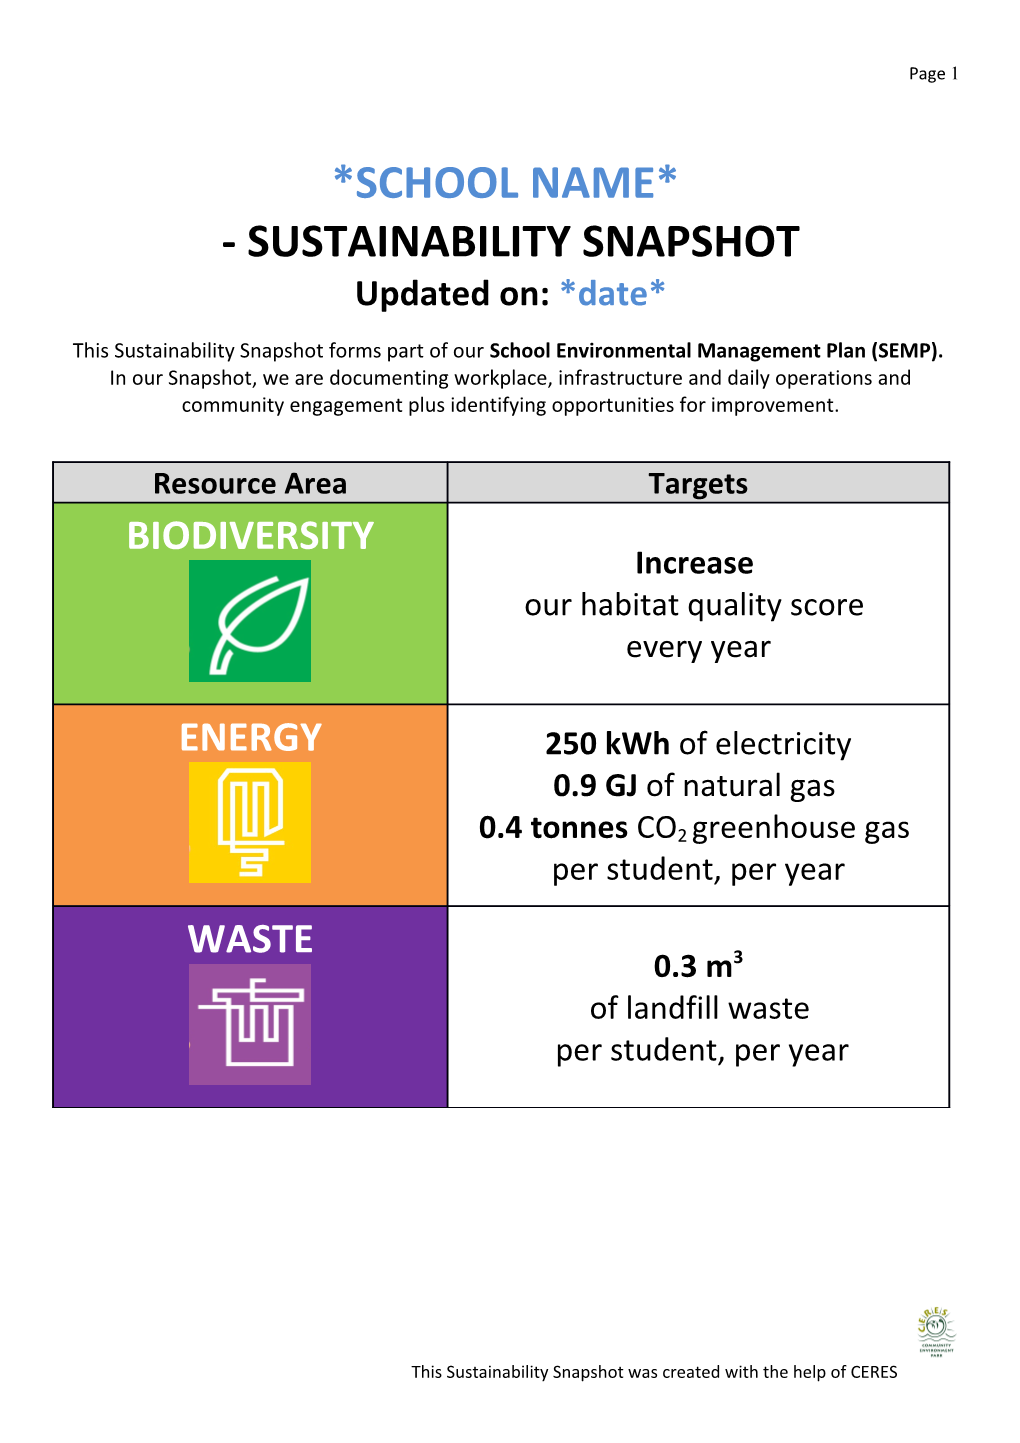 This Sustainability Snapshot Forms Part of Our School Environmental Management Plan (SEMP)